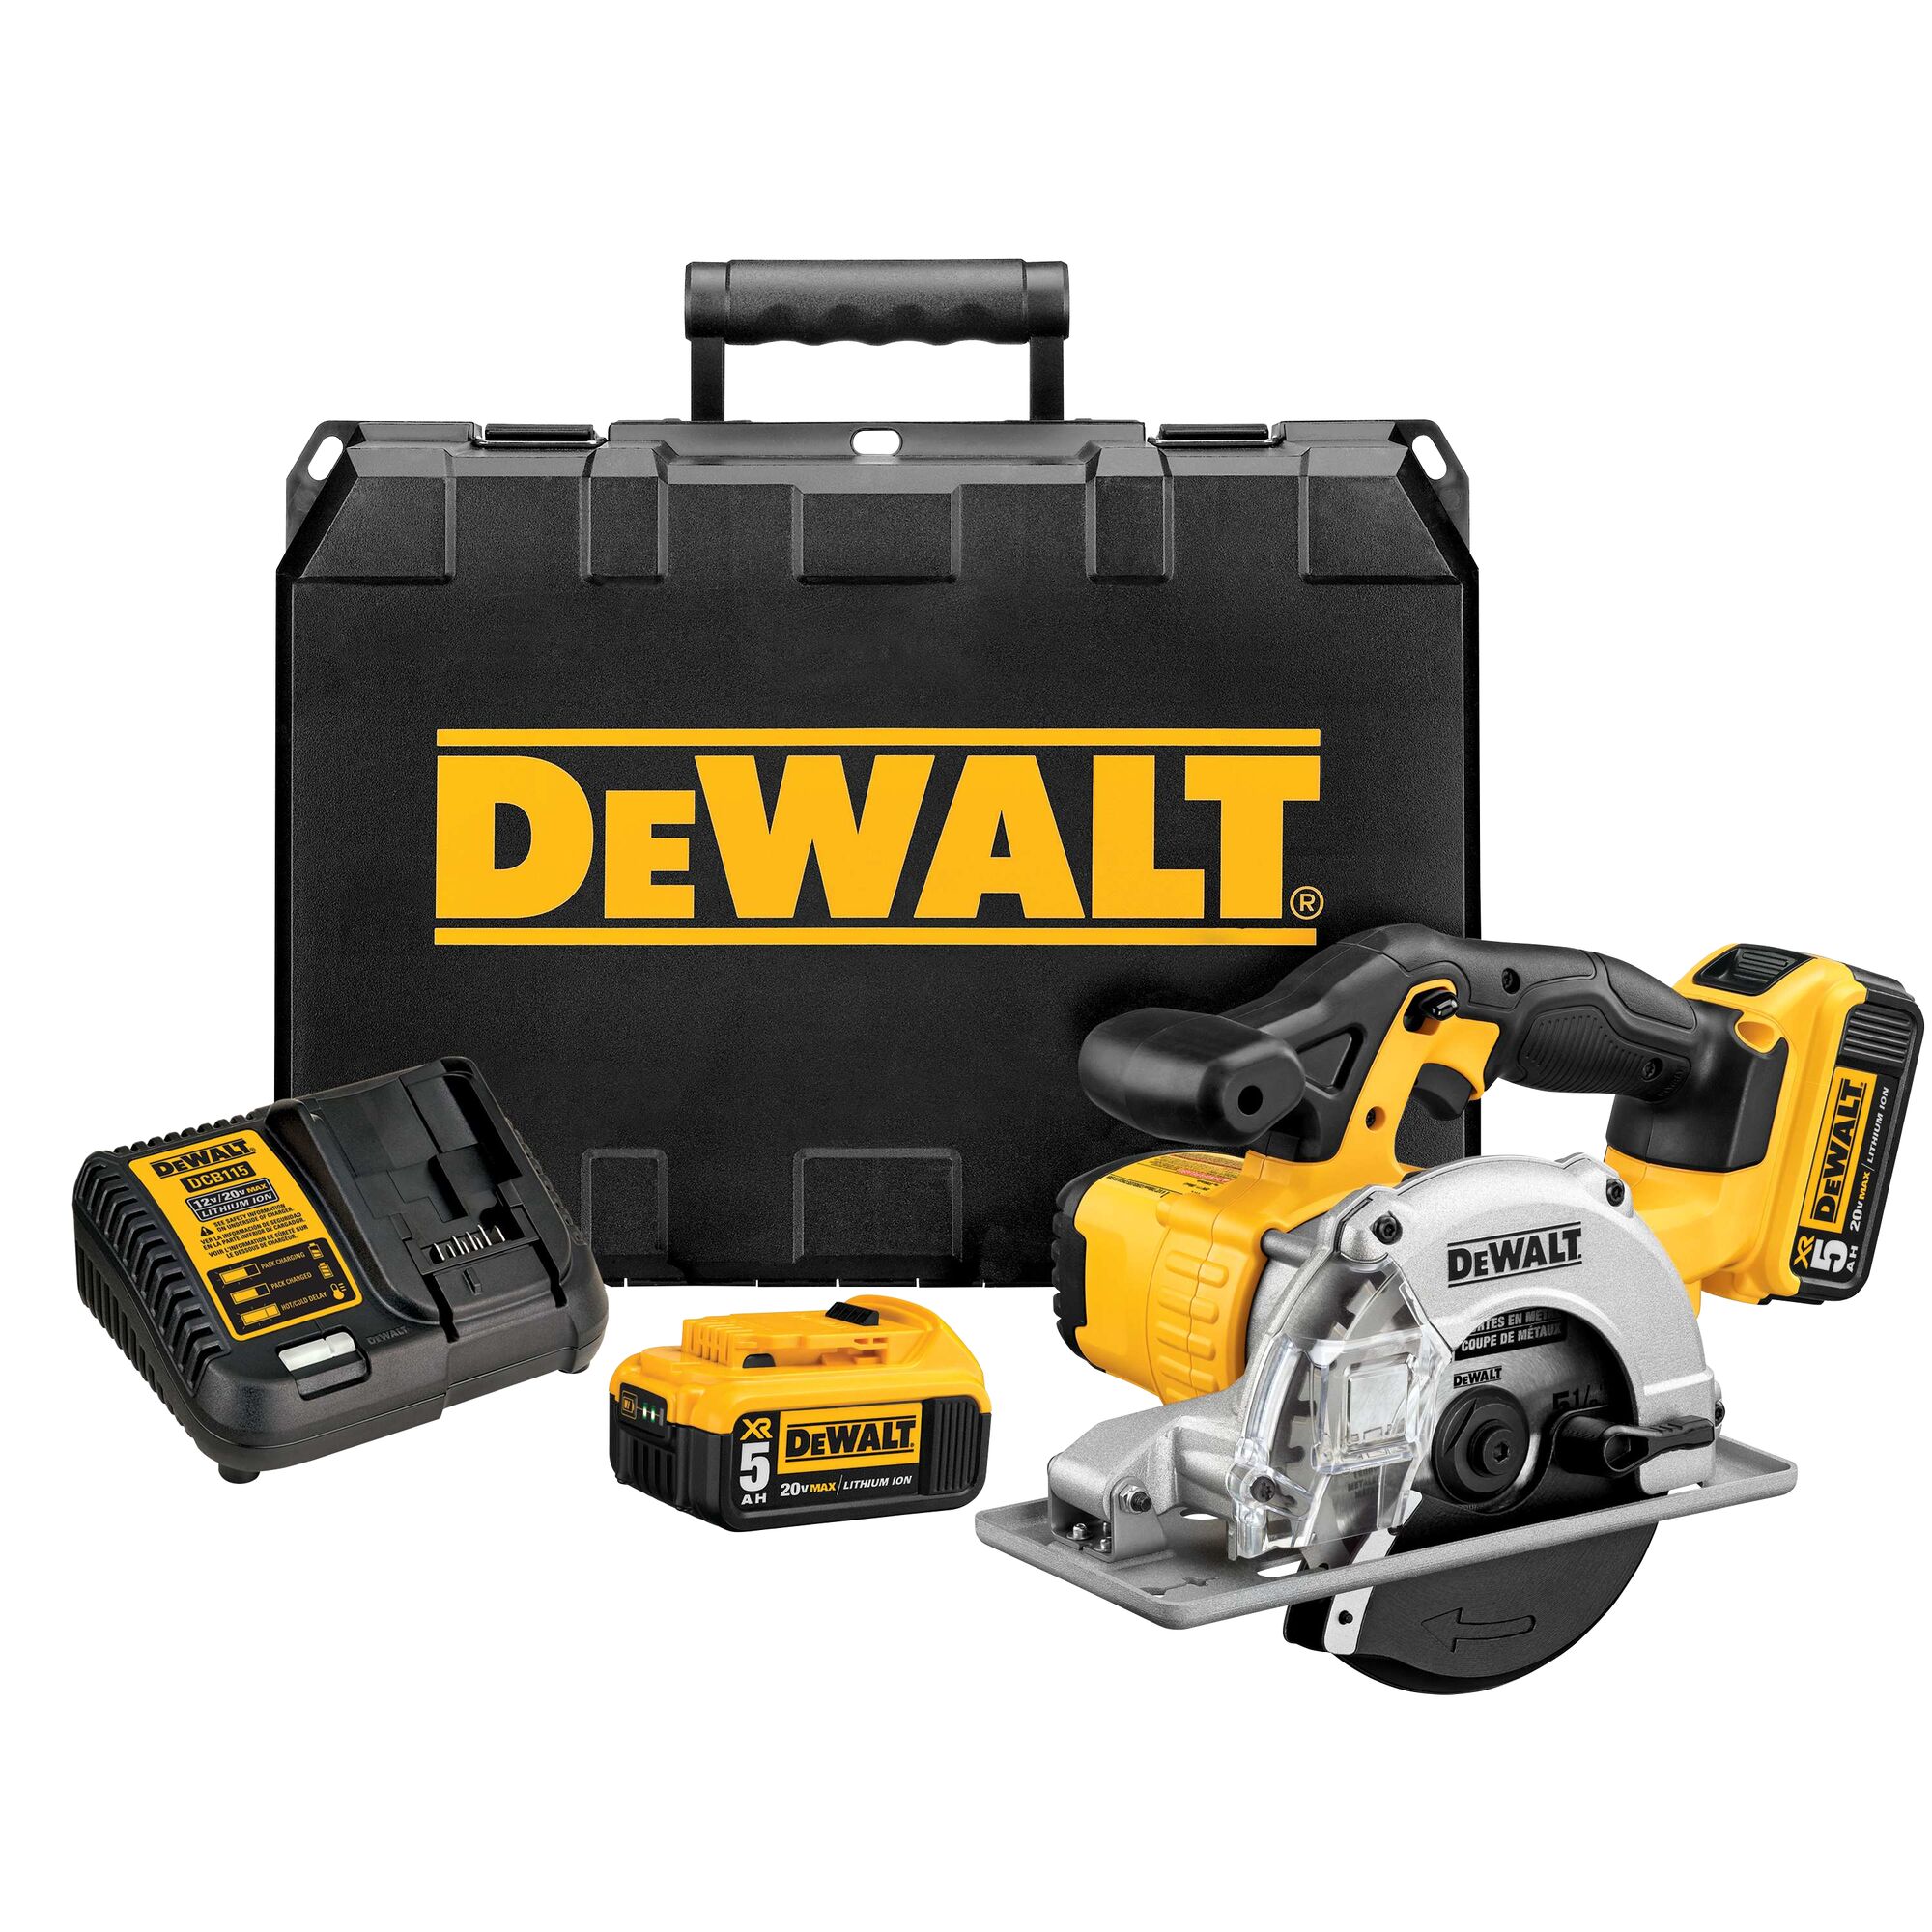 forfølgelse Necessities Selv tak DEWALT 20-volt Max 5-1/2-in Cordless Circular Saw Kit (2-Batteries and  Charger Included) in the Circular Saws department at Lowes.com